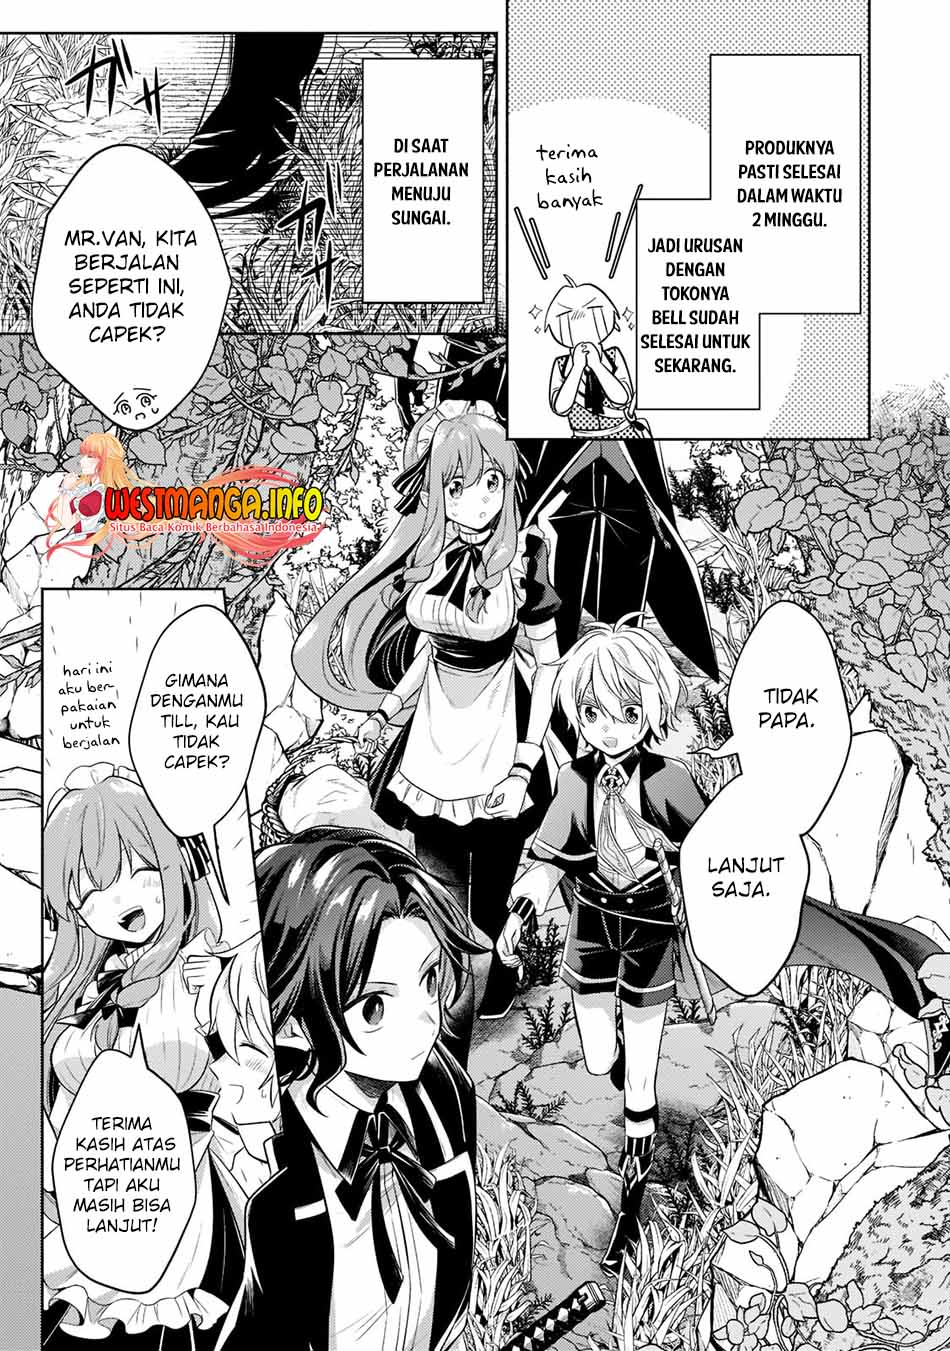 Fun Territory Defense Of The Easy-Going Lord ~The Nameless Village Is Made Into The Strongest Fortified City By Production Magic~ Chapter 14.1 - 111